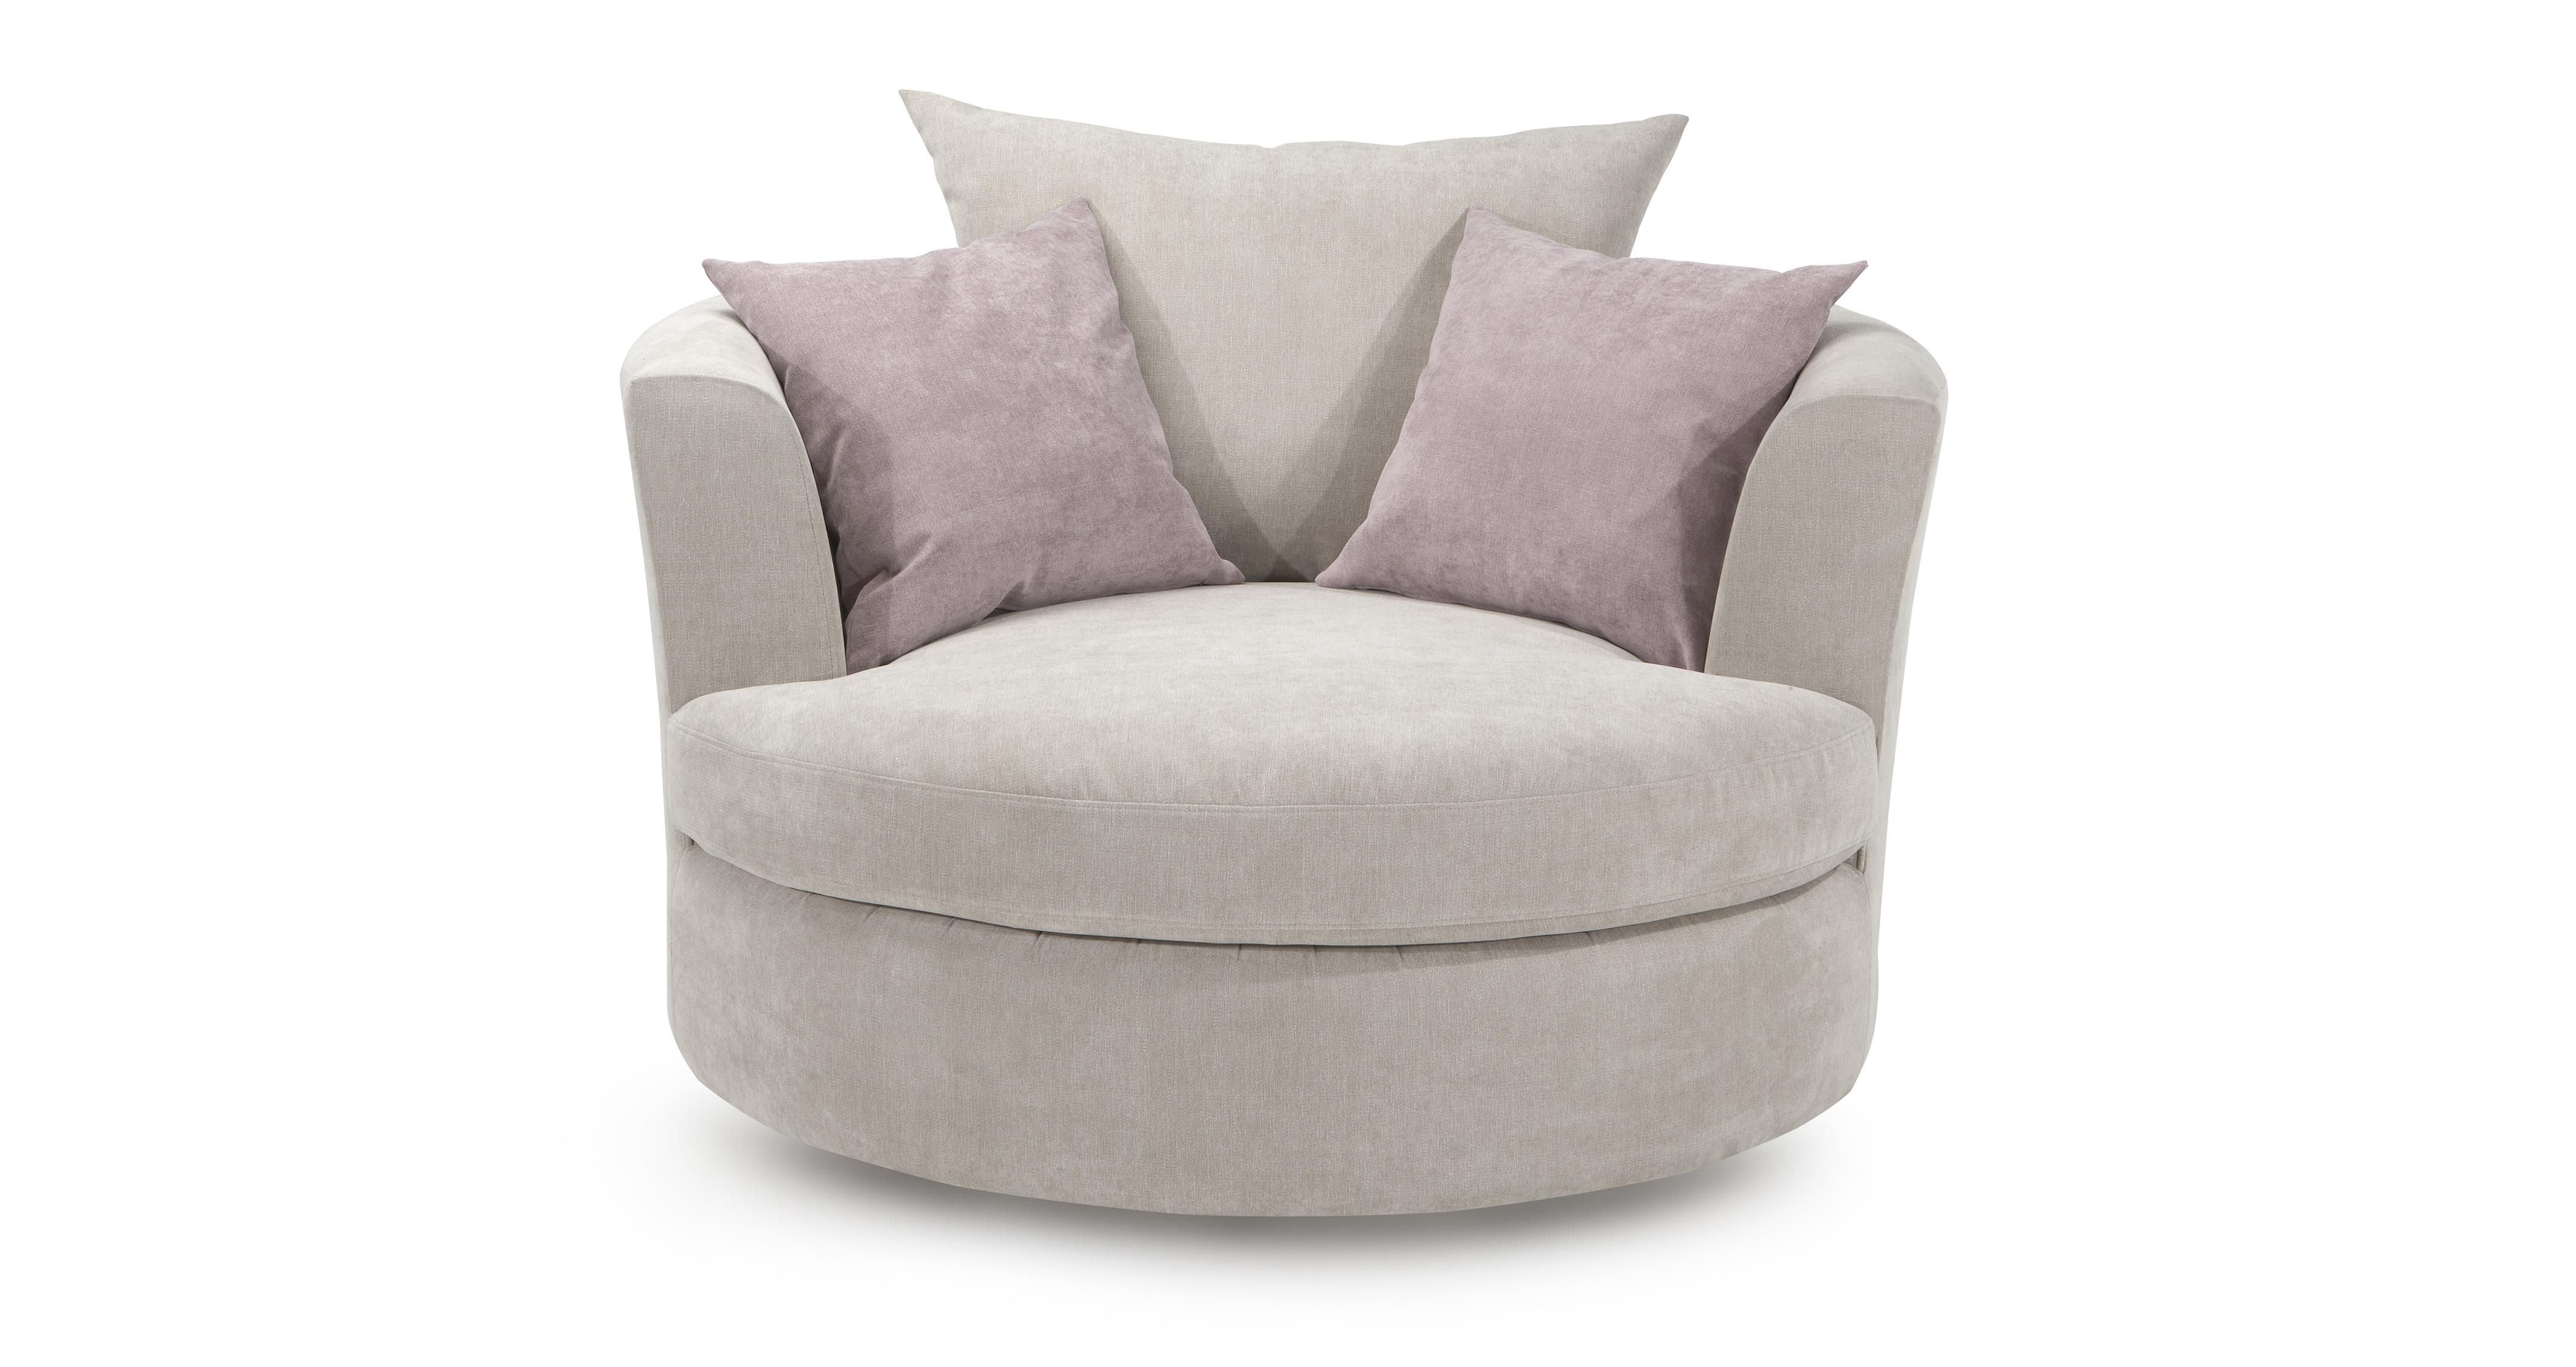 Large Round Swivel Chair Home Chair Designs With Cuddler Swivel Sofa Chairs (View 12 of 15)